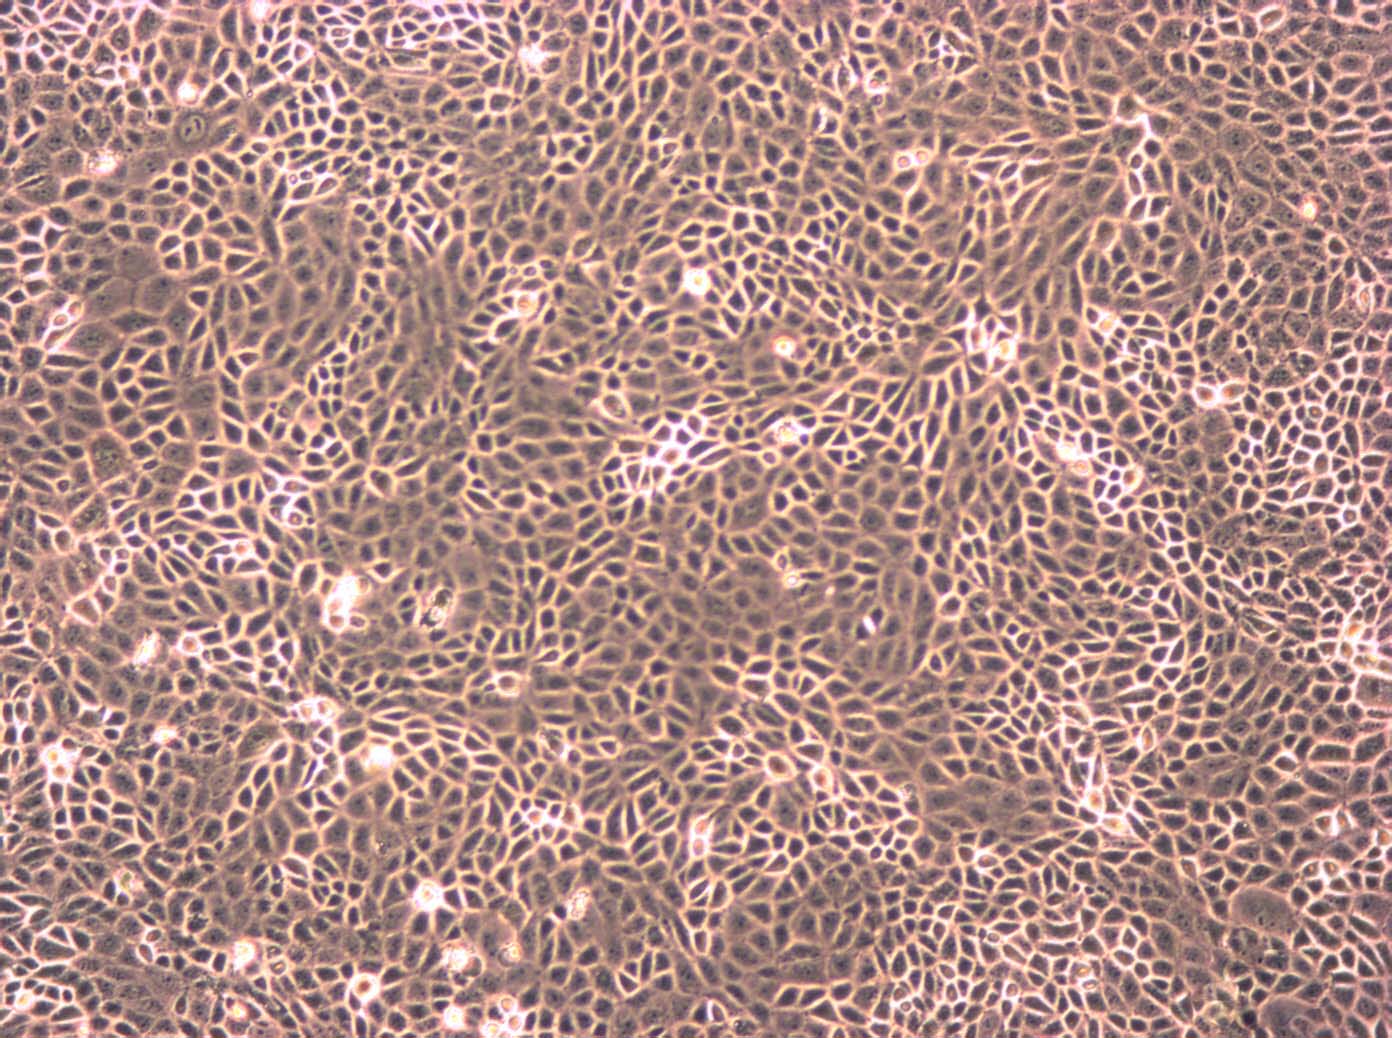 COLO 320 Epithelial Cell|人结肠癌传代细胞(有STR鉴定),COLO 320 Epithelial Cell